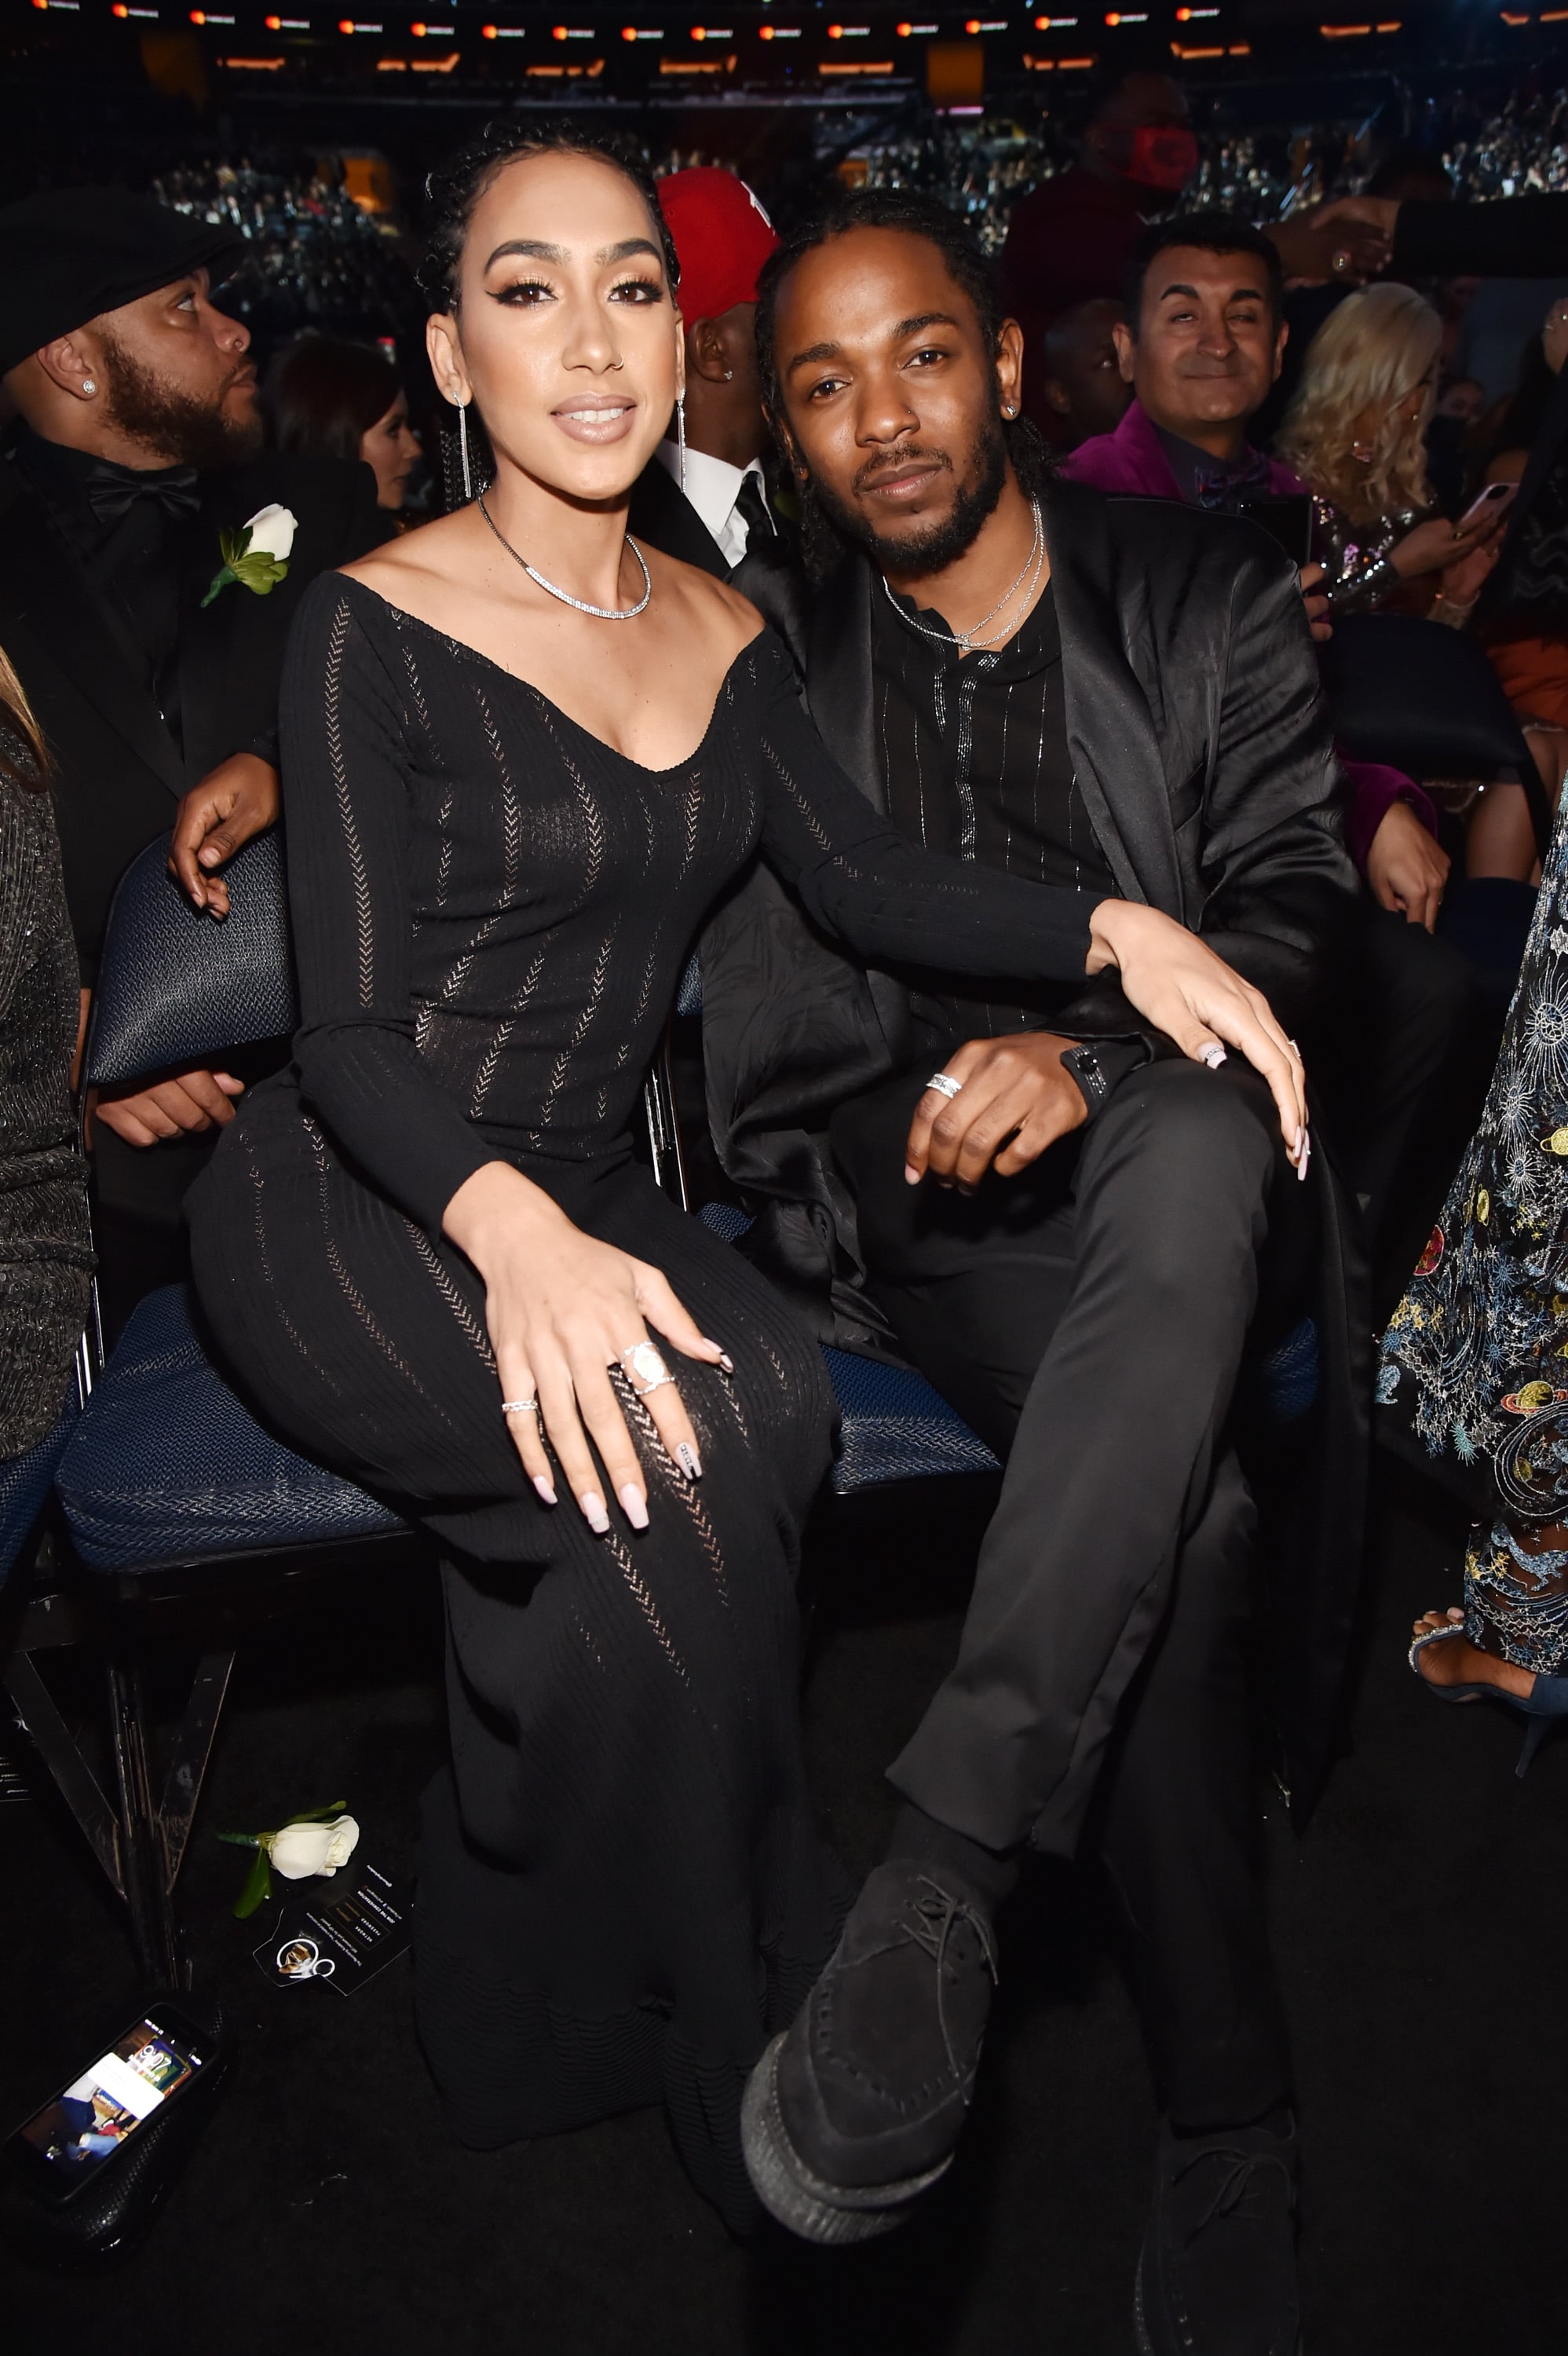 Kendrick Lamar & Fiancee Whitney Alford Attend Grammys 2016!: Photo 3579812, 2016 Grammys, Grammys, Kendrick Lamar, Whitney Alford Photos